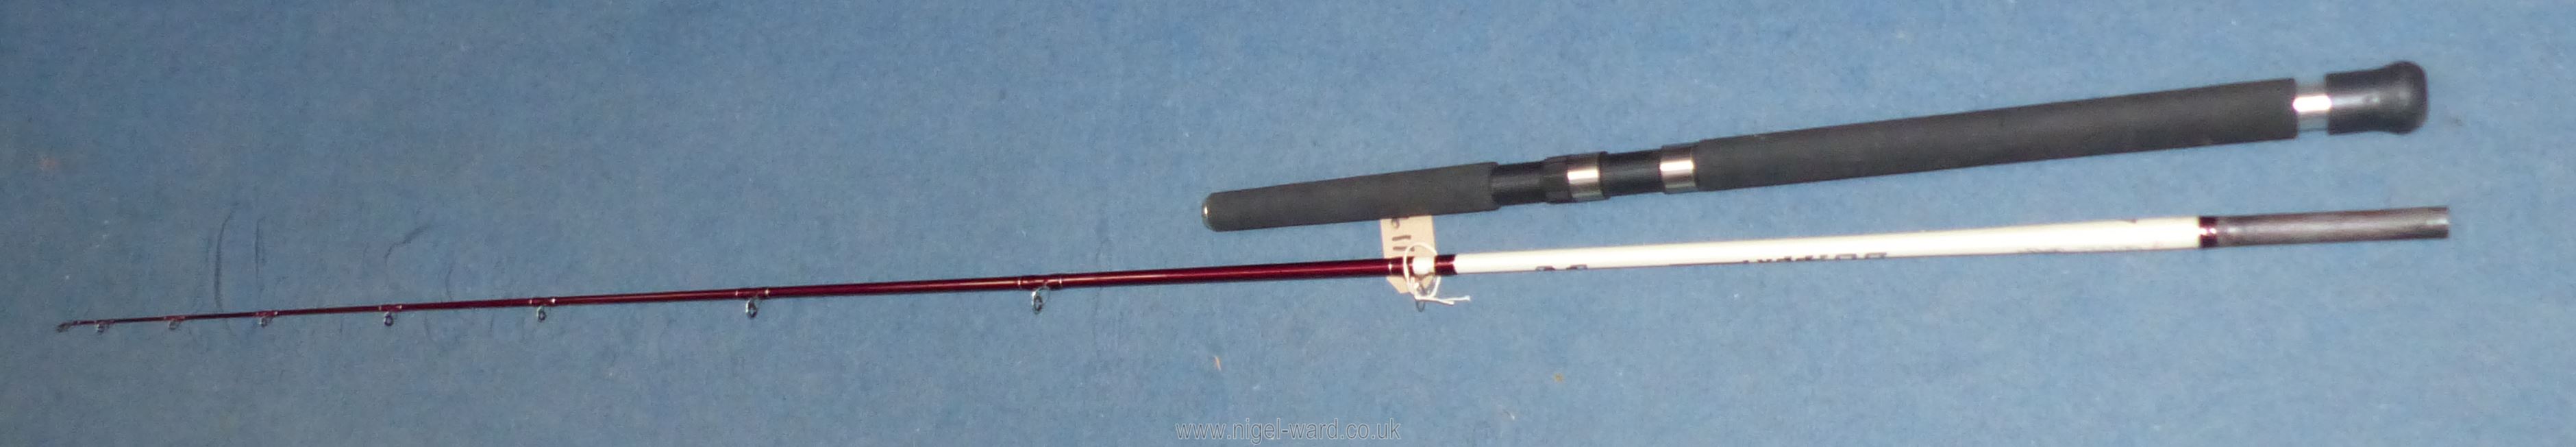 An 'Imax' 8' 6'' long two piece Boat Rod, in long zipped protective tube, in very good condition.